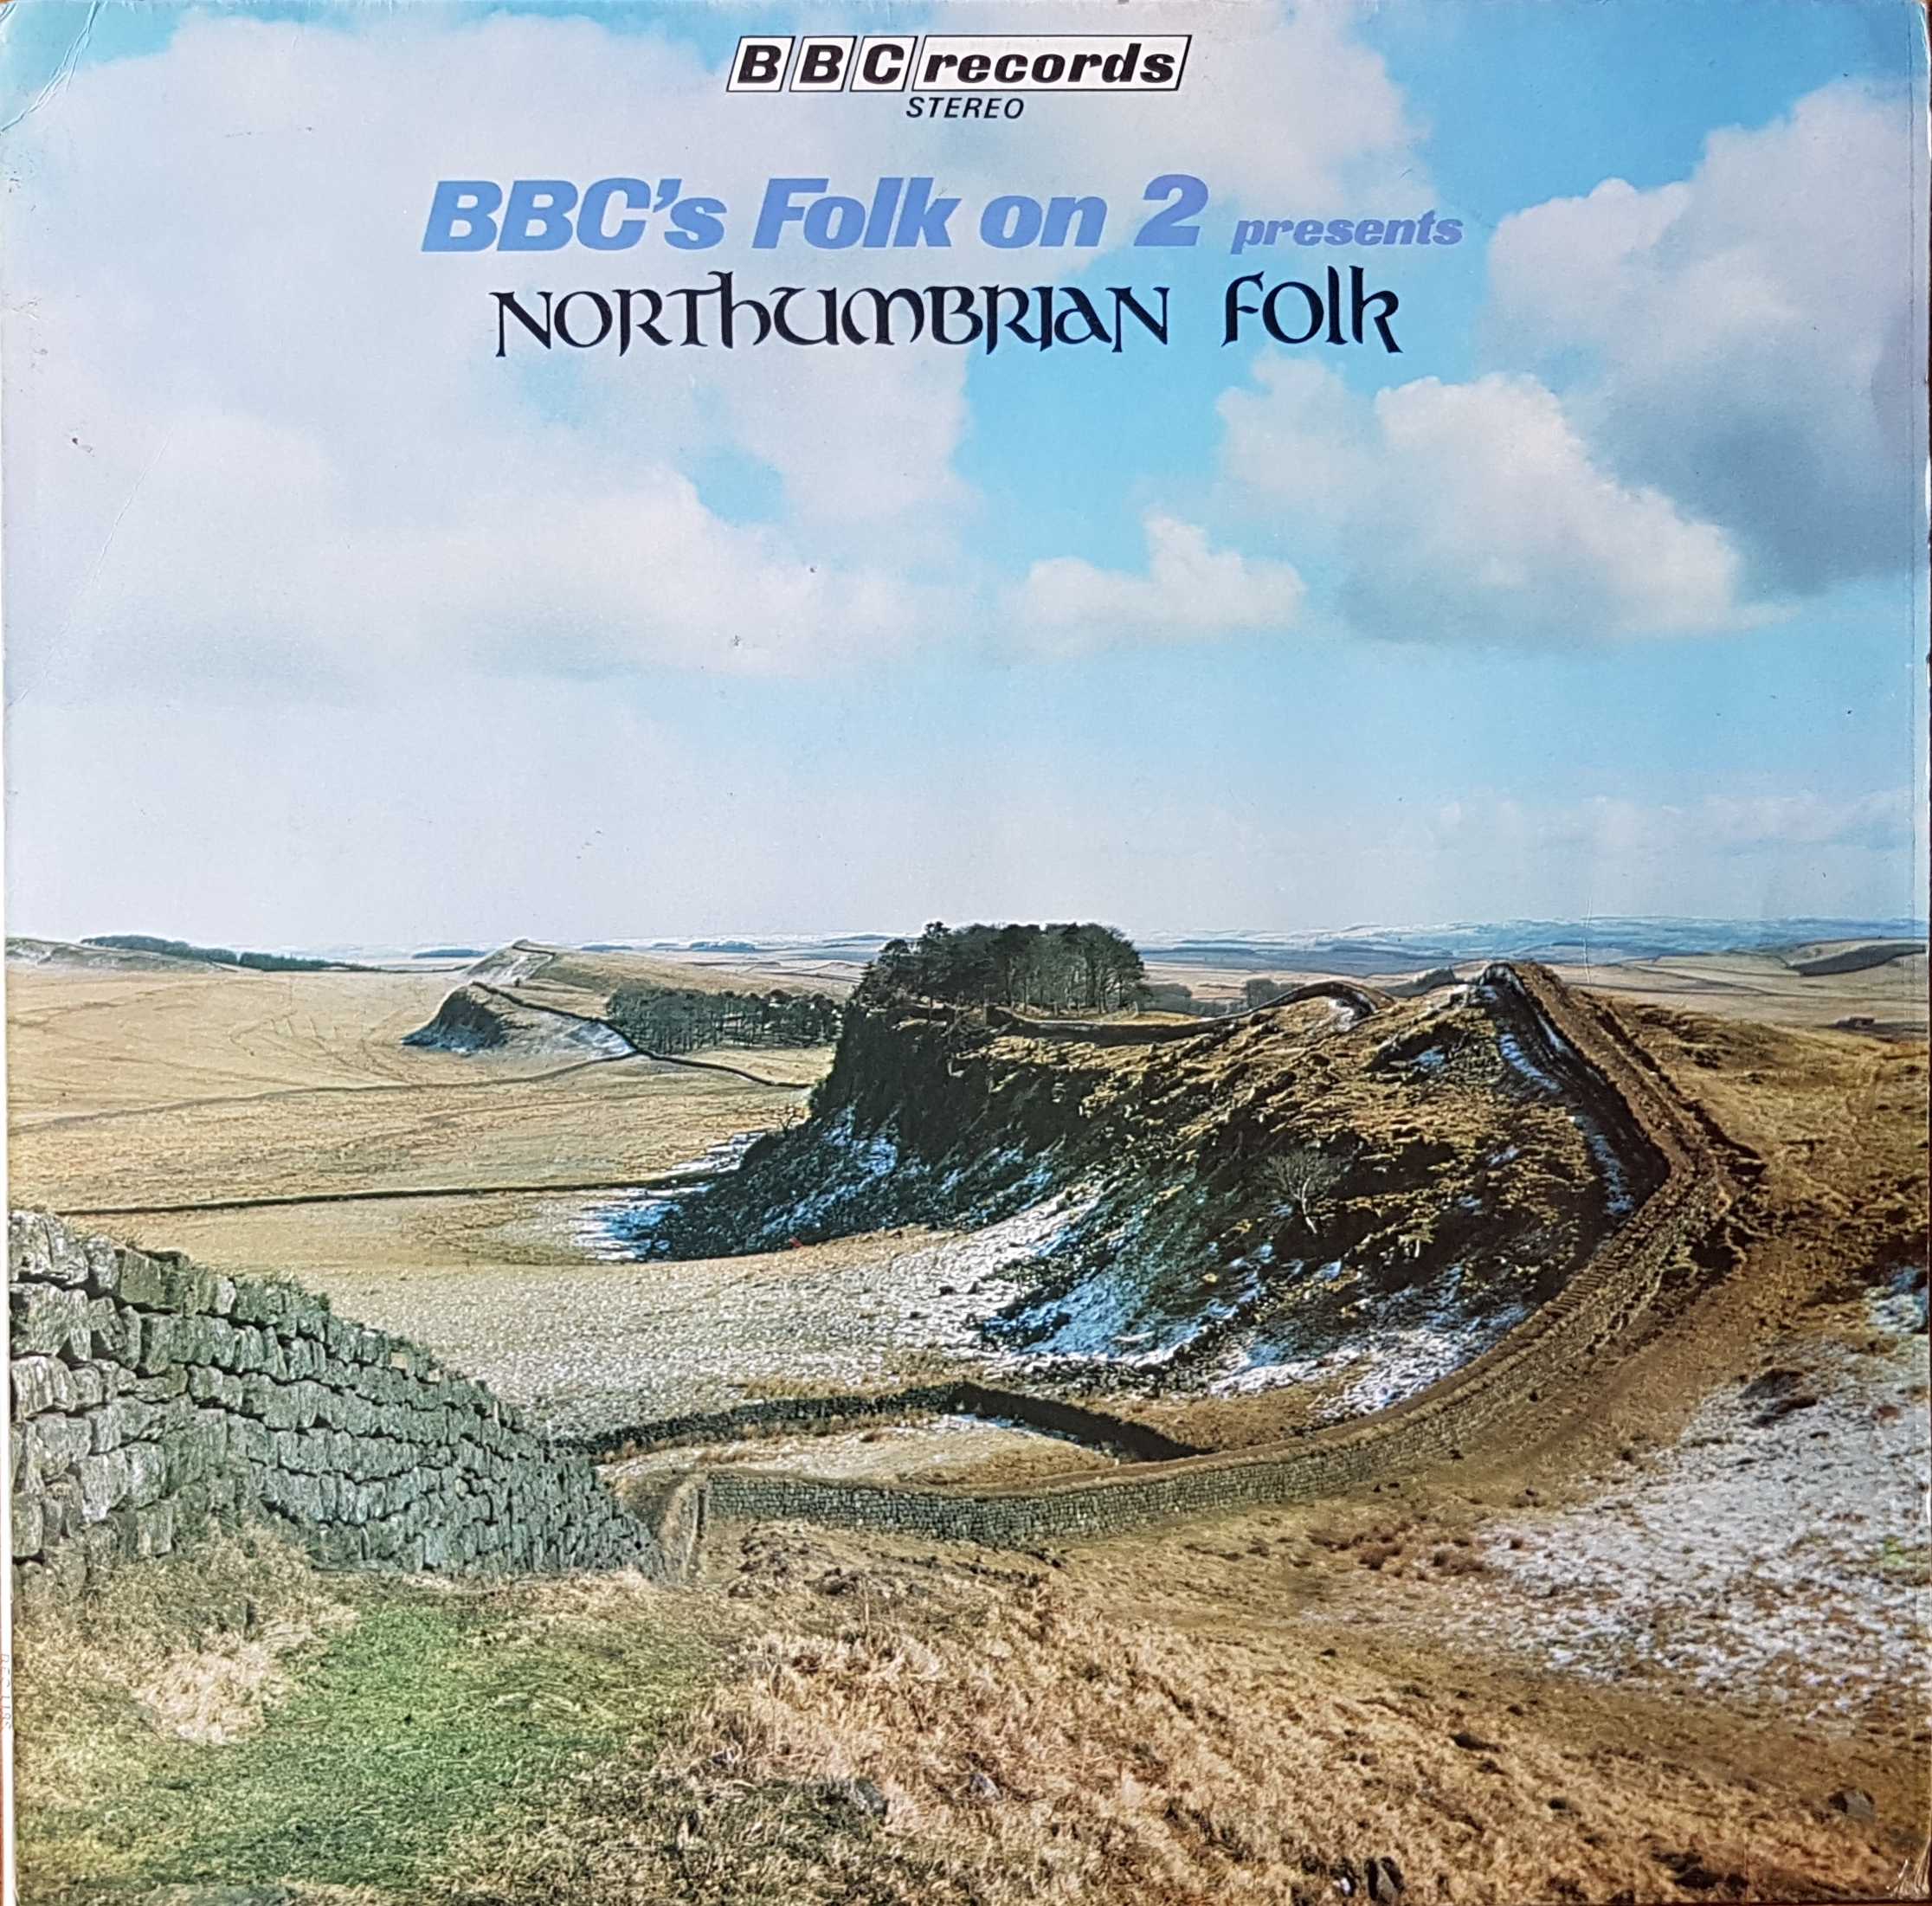 Picture of REC 118 BBC's folk on 2 - Northumbrian folk album by artist Various from the BBC records and Tapes library